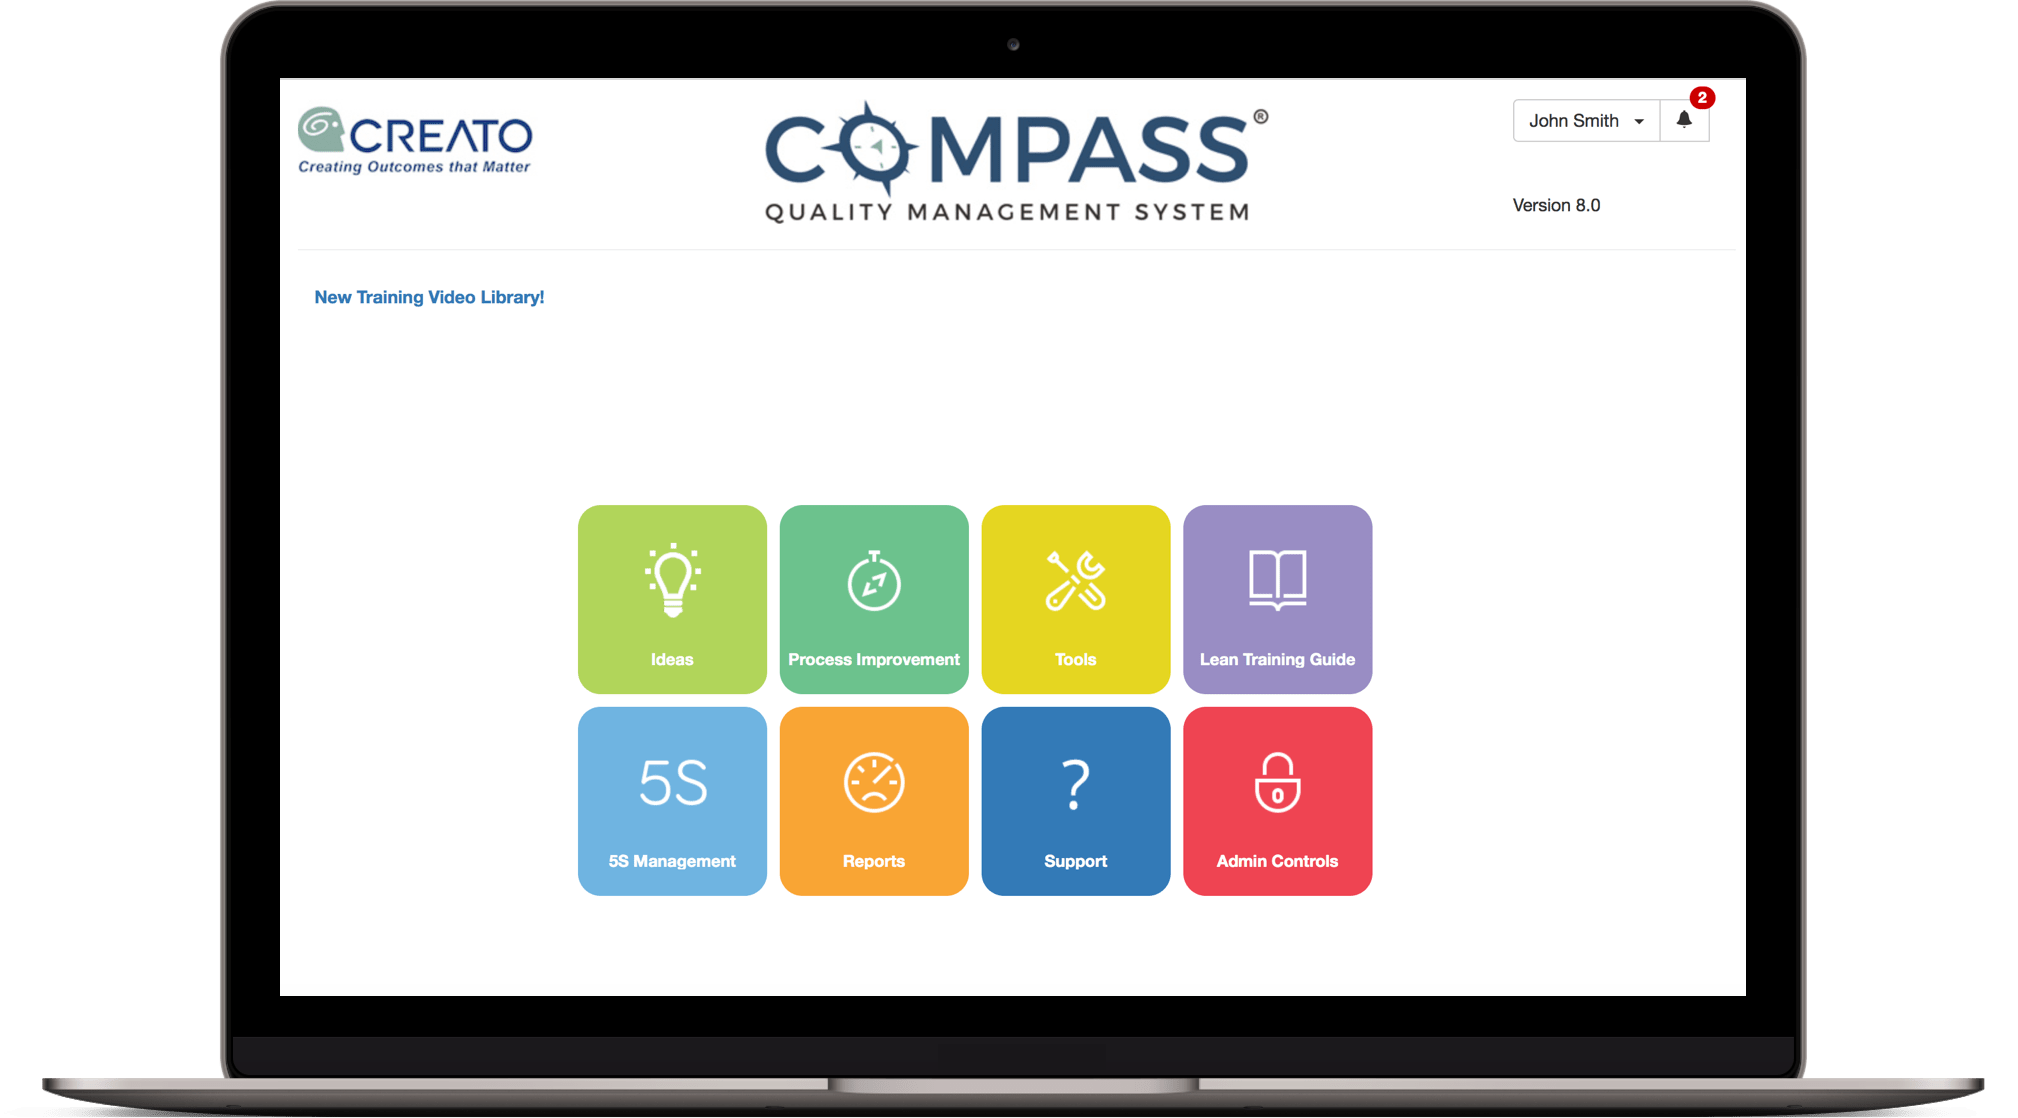 Screenshot of Compass Quality Management System welcome screen